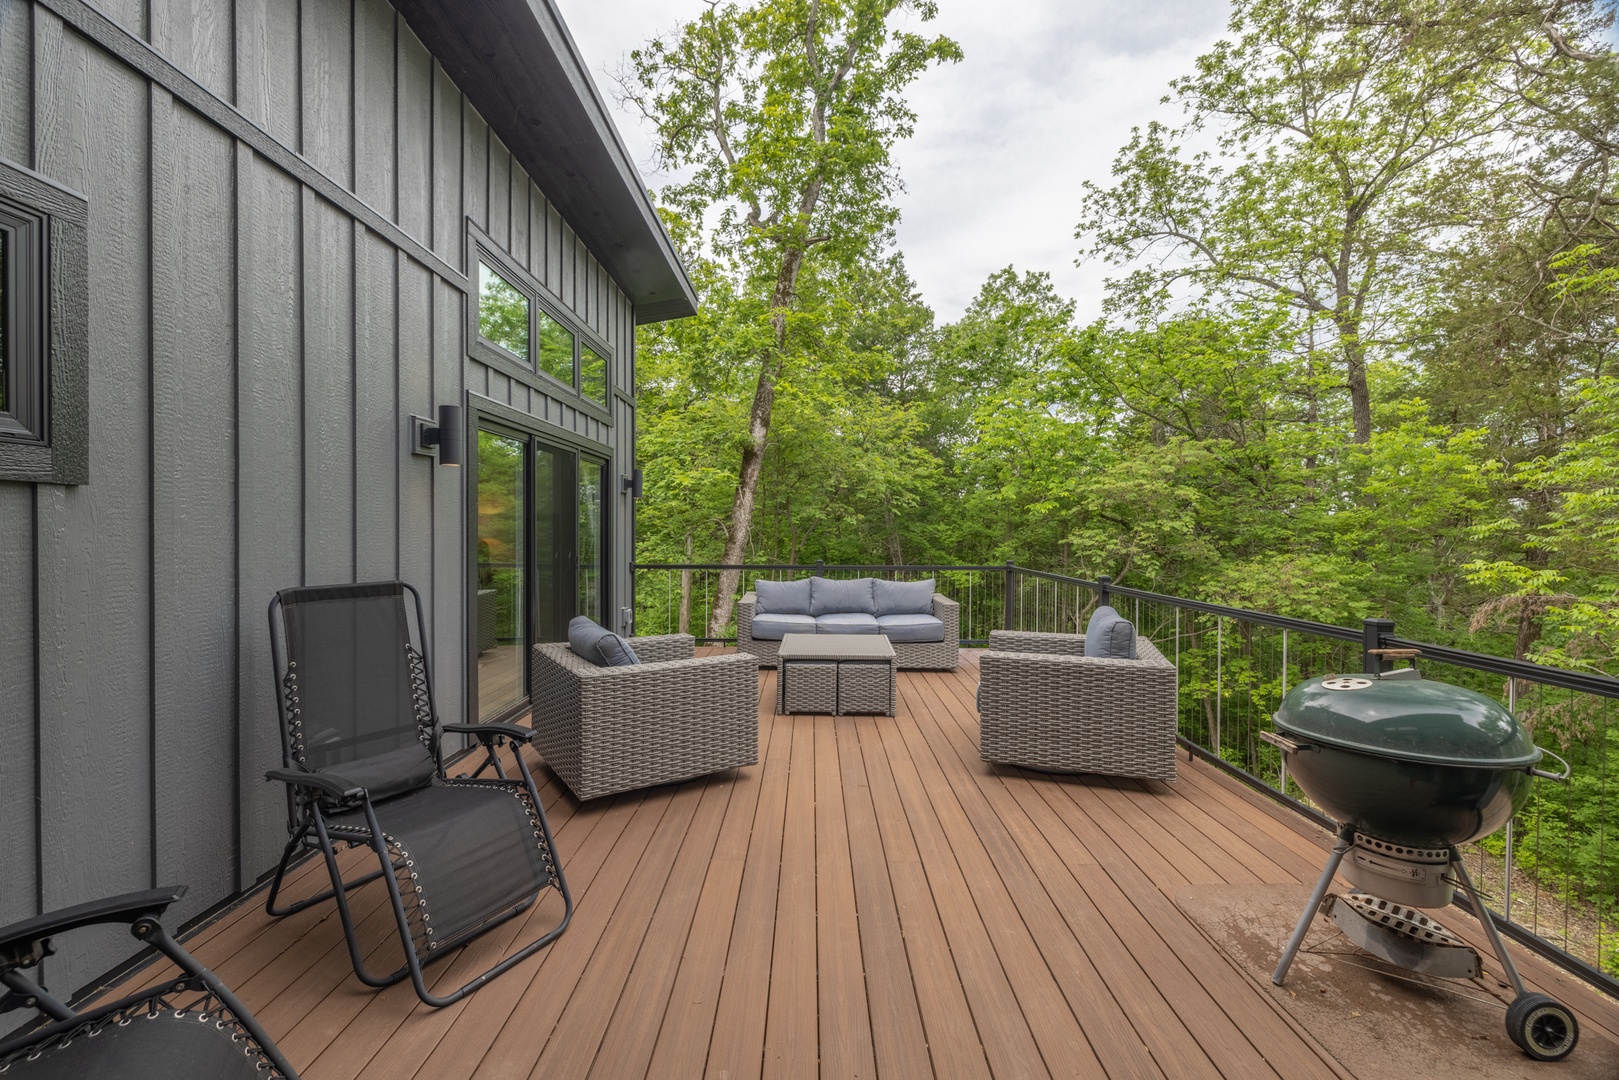 Enjoy nature views from the spacious deck with ample patio seating and a charcoal grill